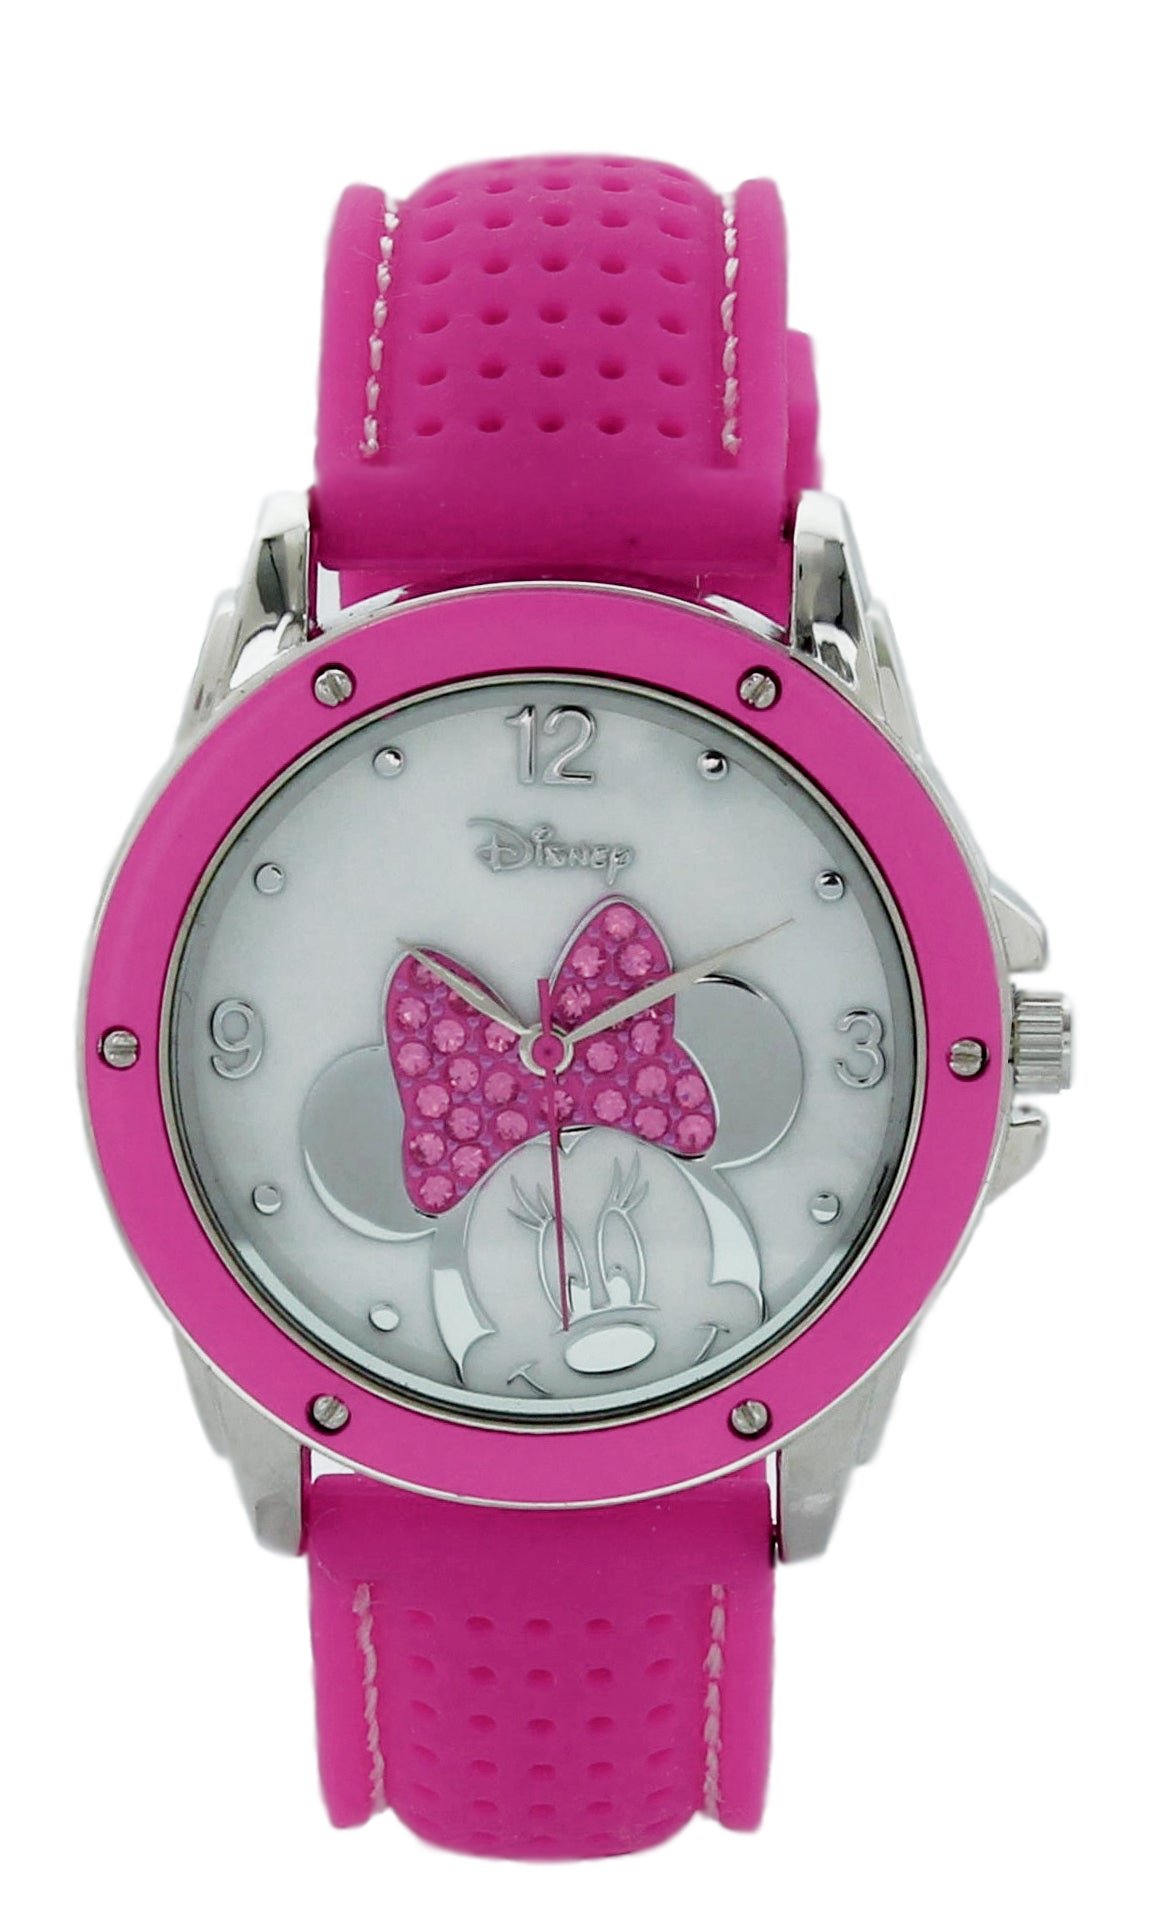 Model: Women's Disney Minnie Mouse Watch with MOP Dial and Hot Pink Strap